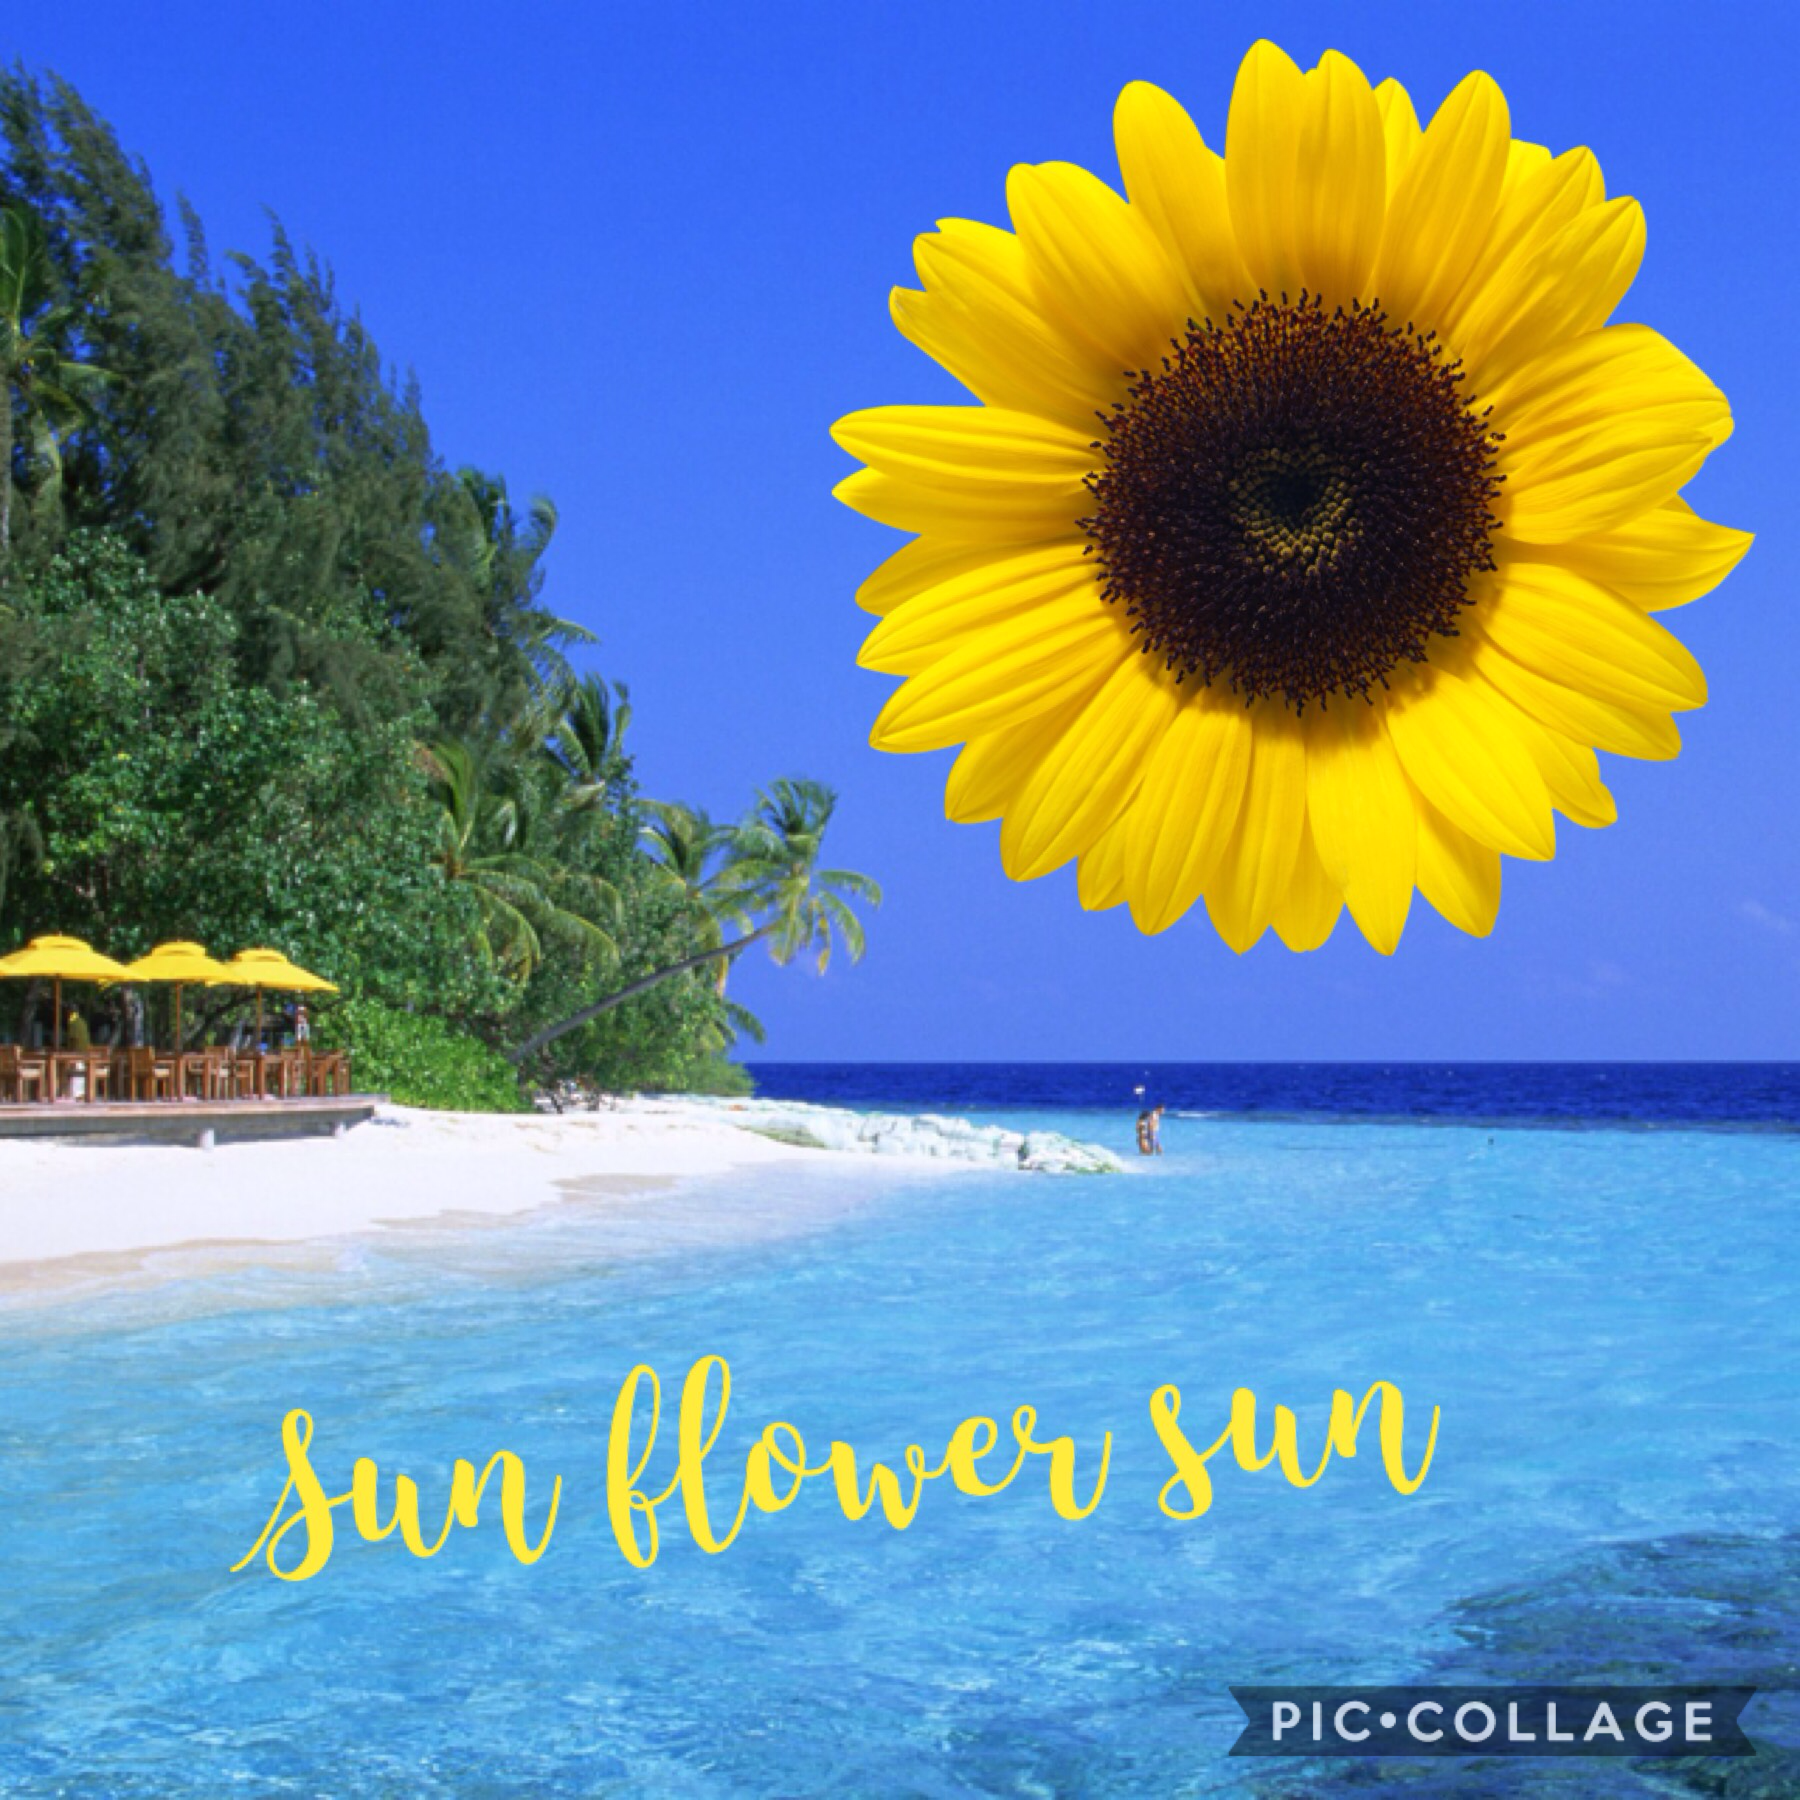 Gone to the beach imagine a sun flower as a sun⛄️imagine how much cooler I'd be in summer!!!!